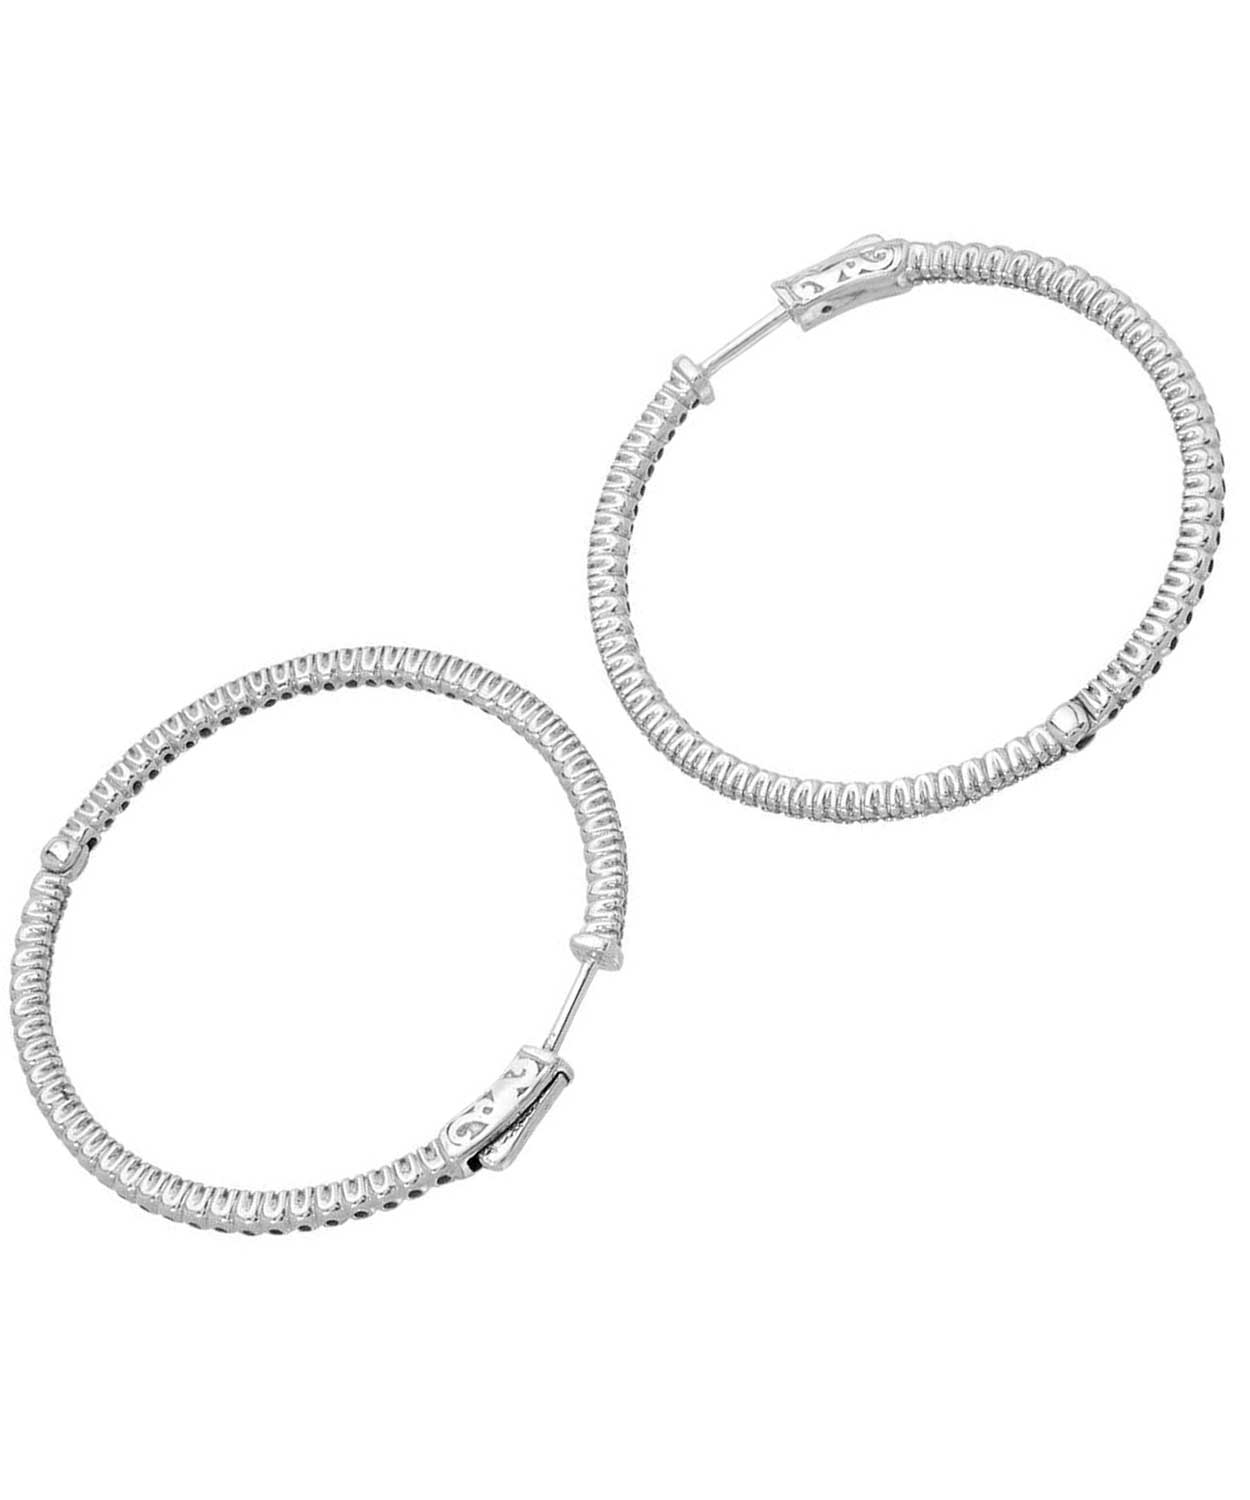 Signature Collection 1.21 ctw Diamond 14k White Gold Inside-Out Hoop Earrings View 2